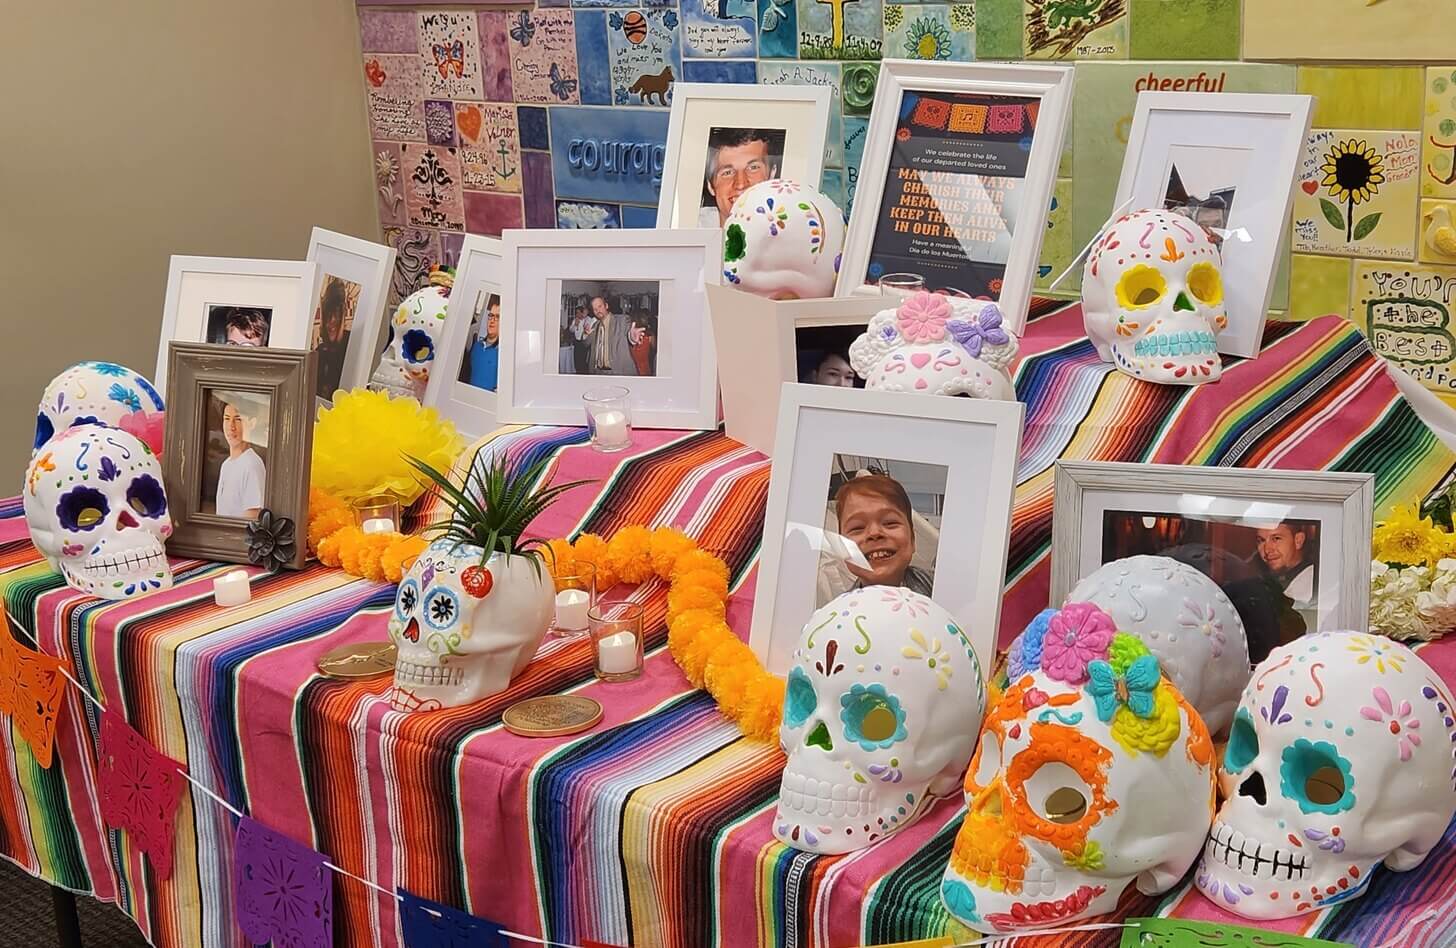 An altar is decorated for Dia de los Muertos with sugar skulls and photos of loved ones.